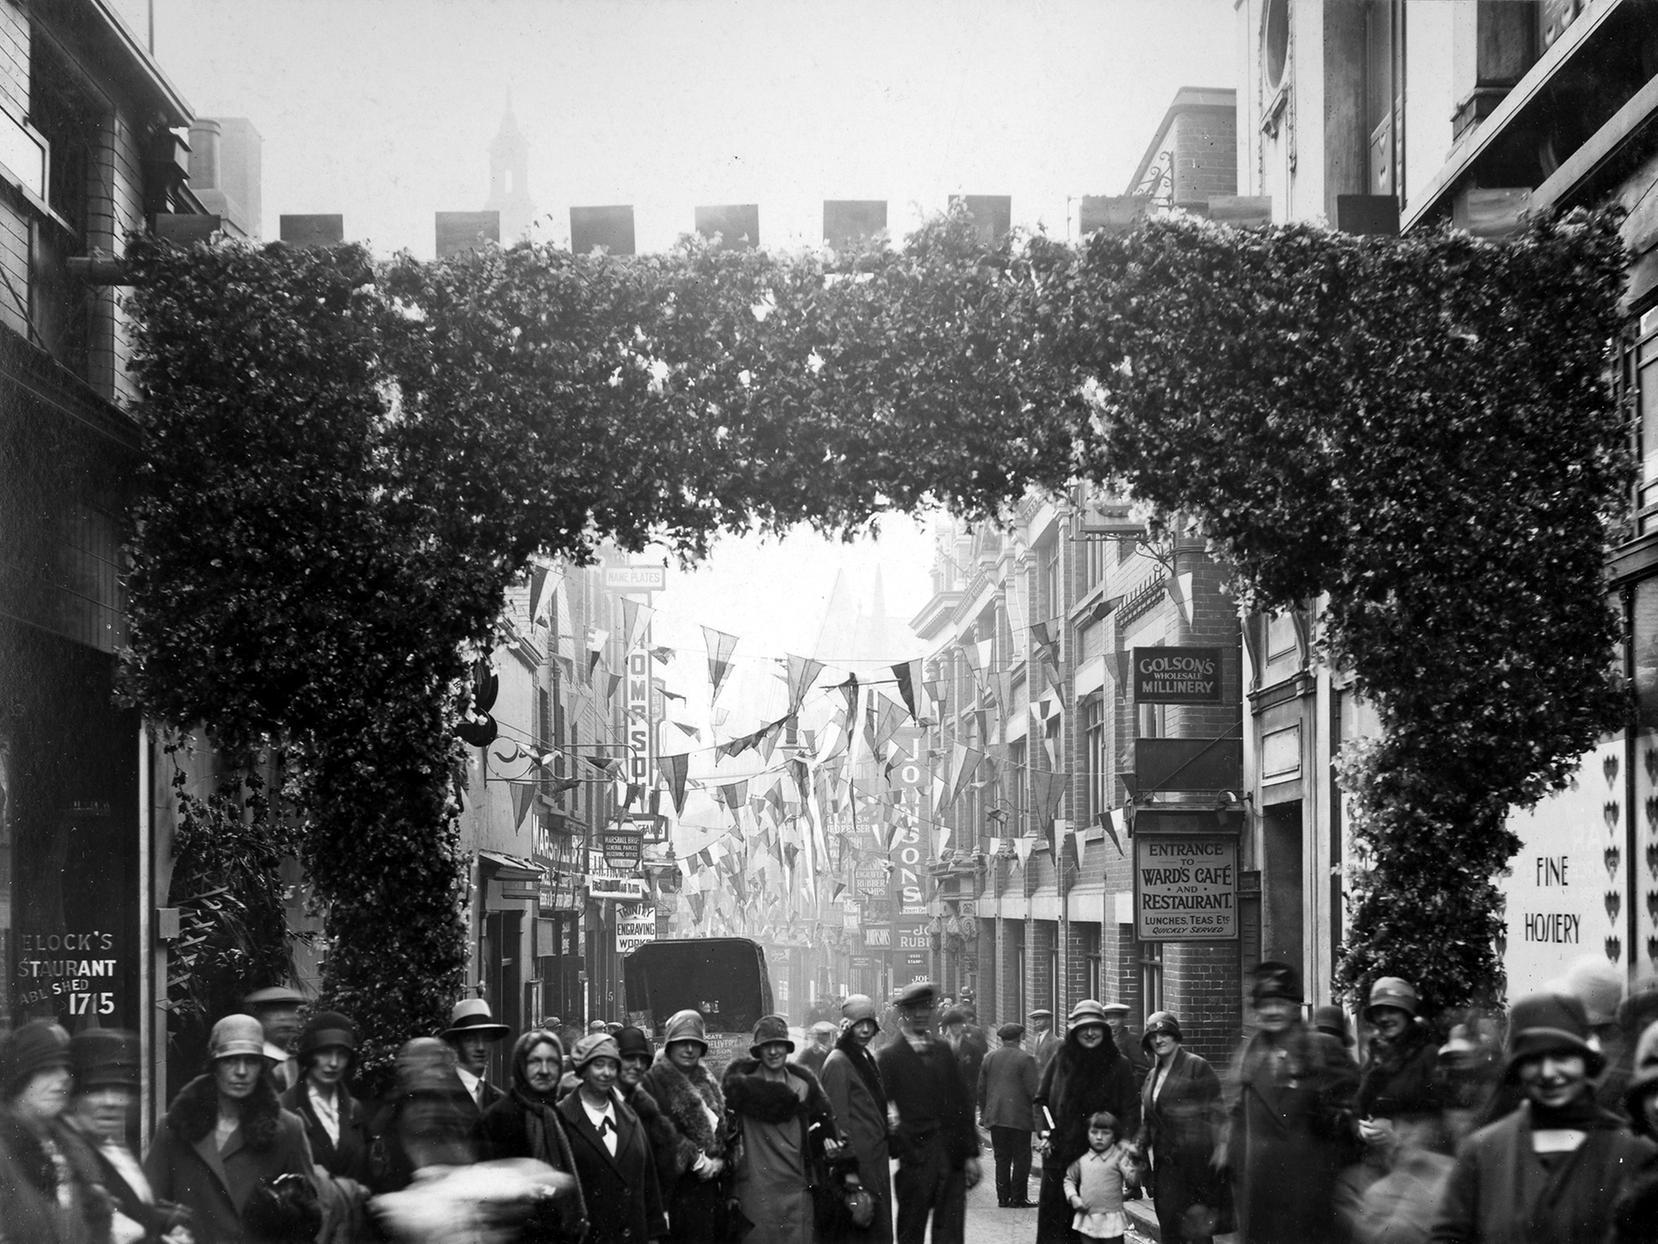 Another photo from Civic Week. In this view, Trinity Street can be seen. Entered through an evegreen arch, the street is decked with bunting and busy with people.